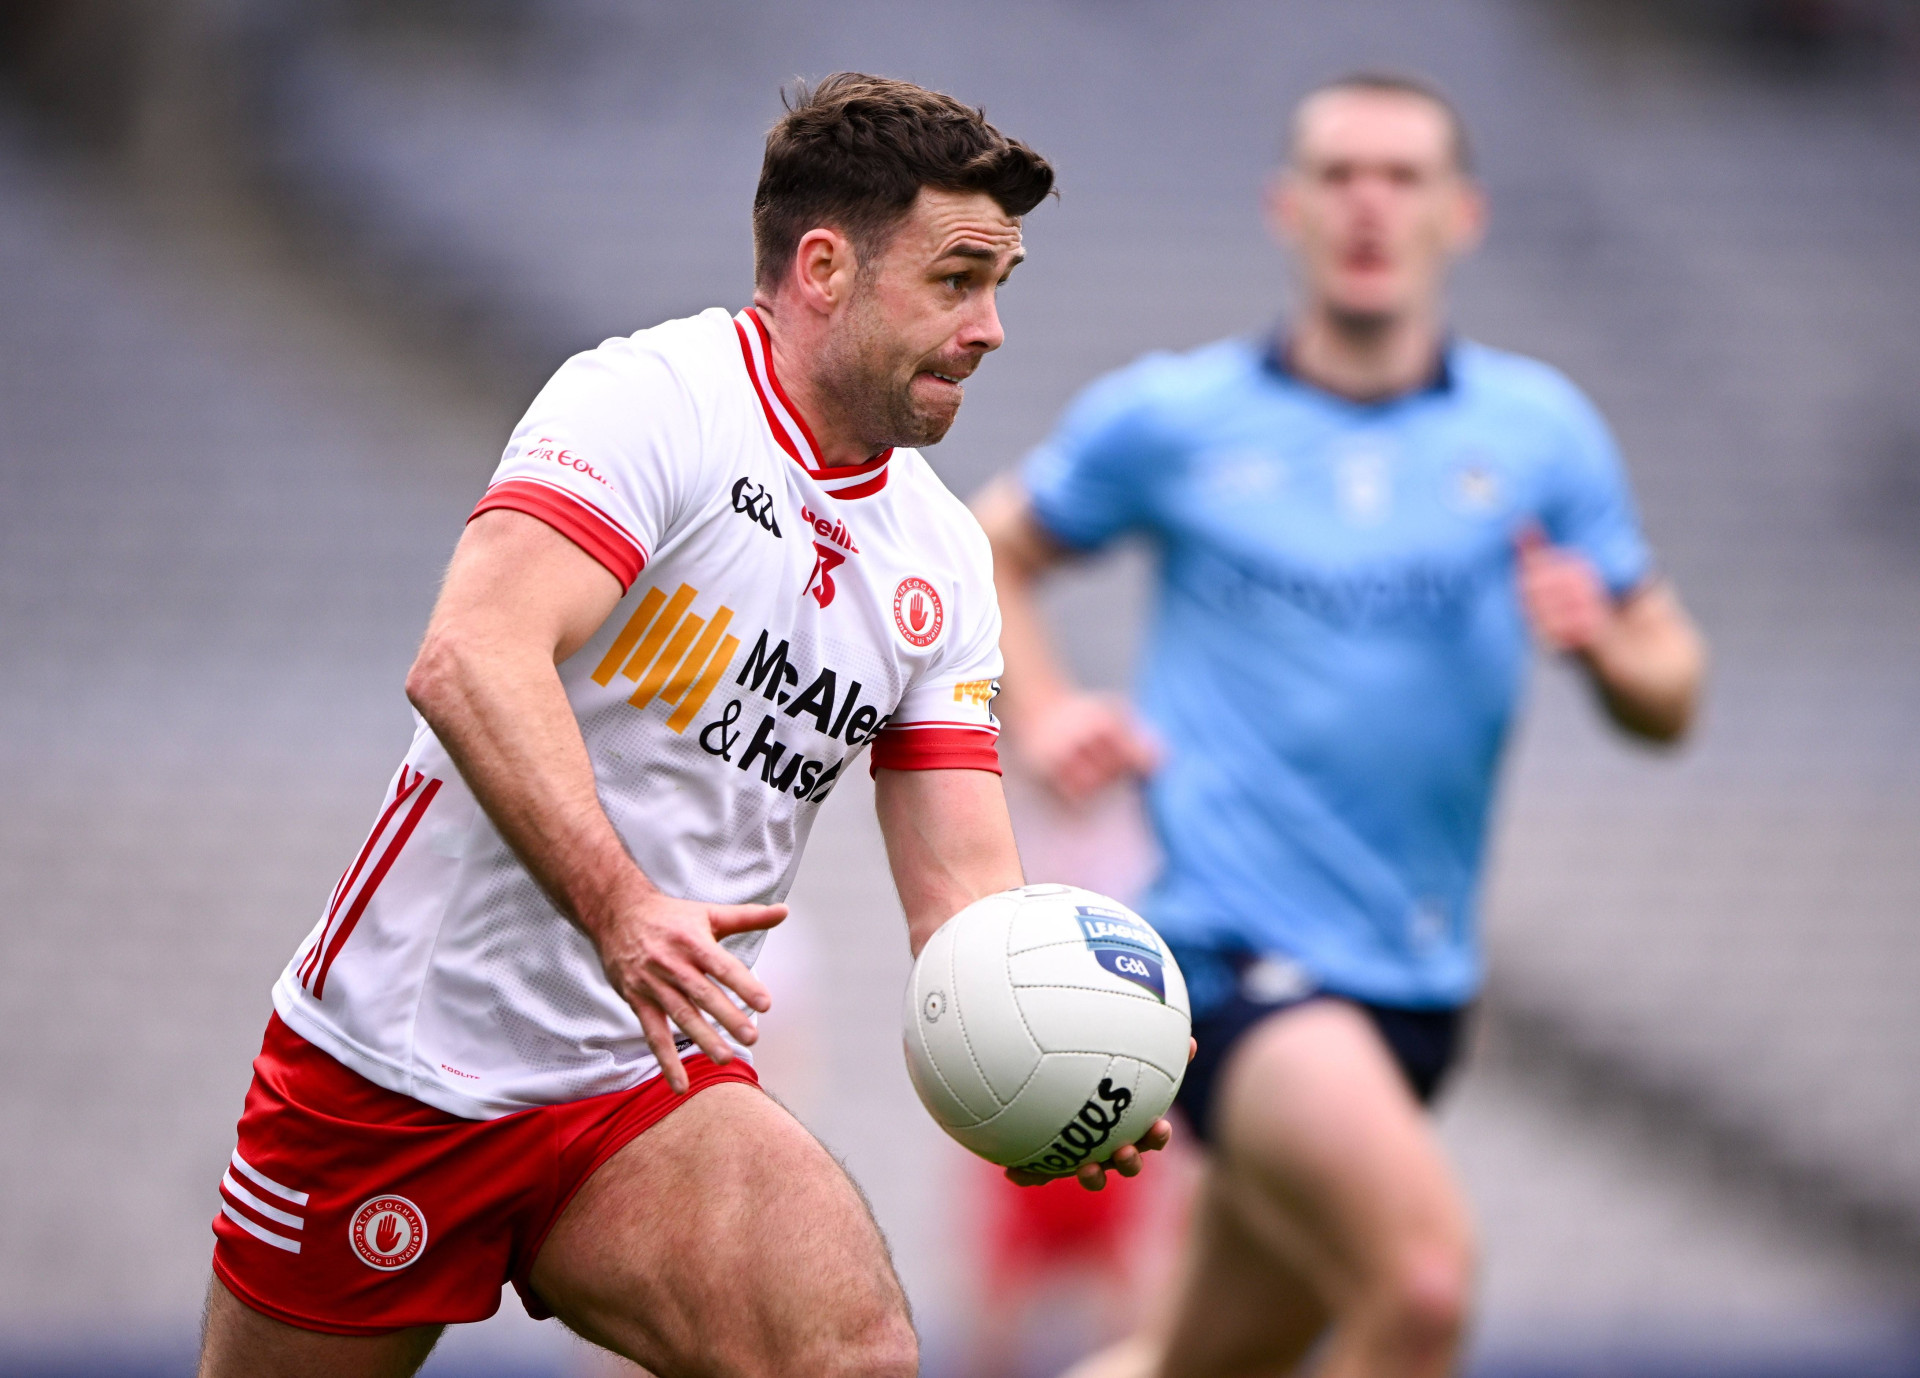 ‘Blue’ day for out of sorts Tyrone at Croke Park